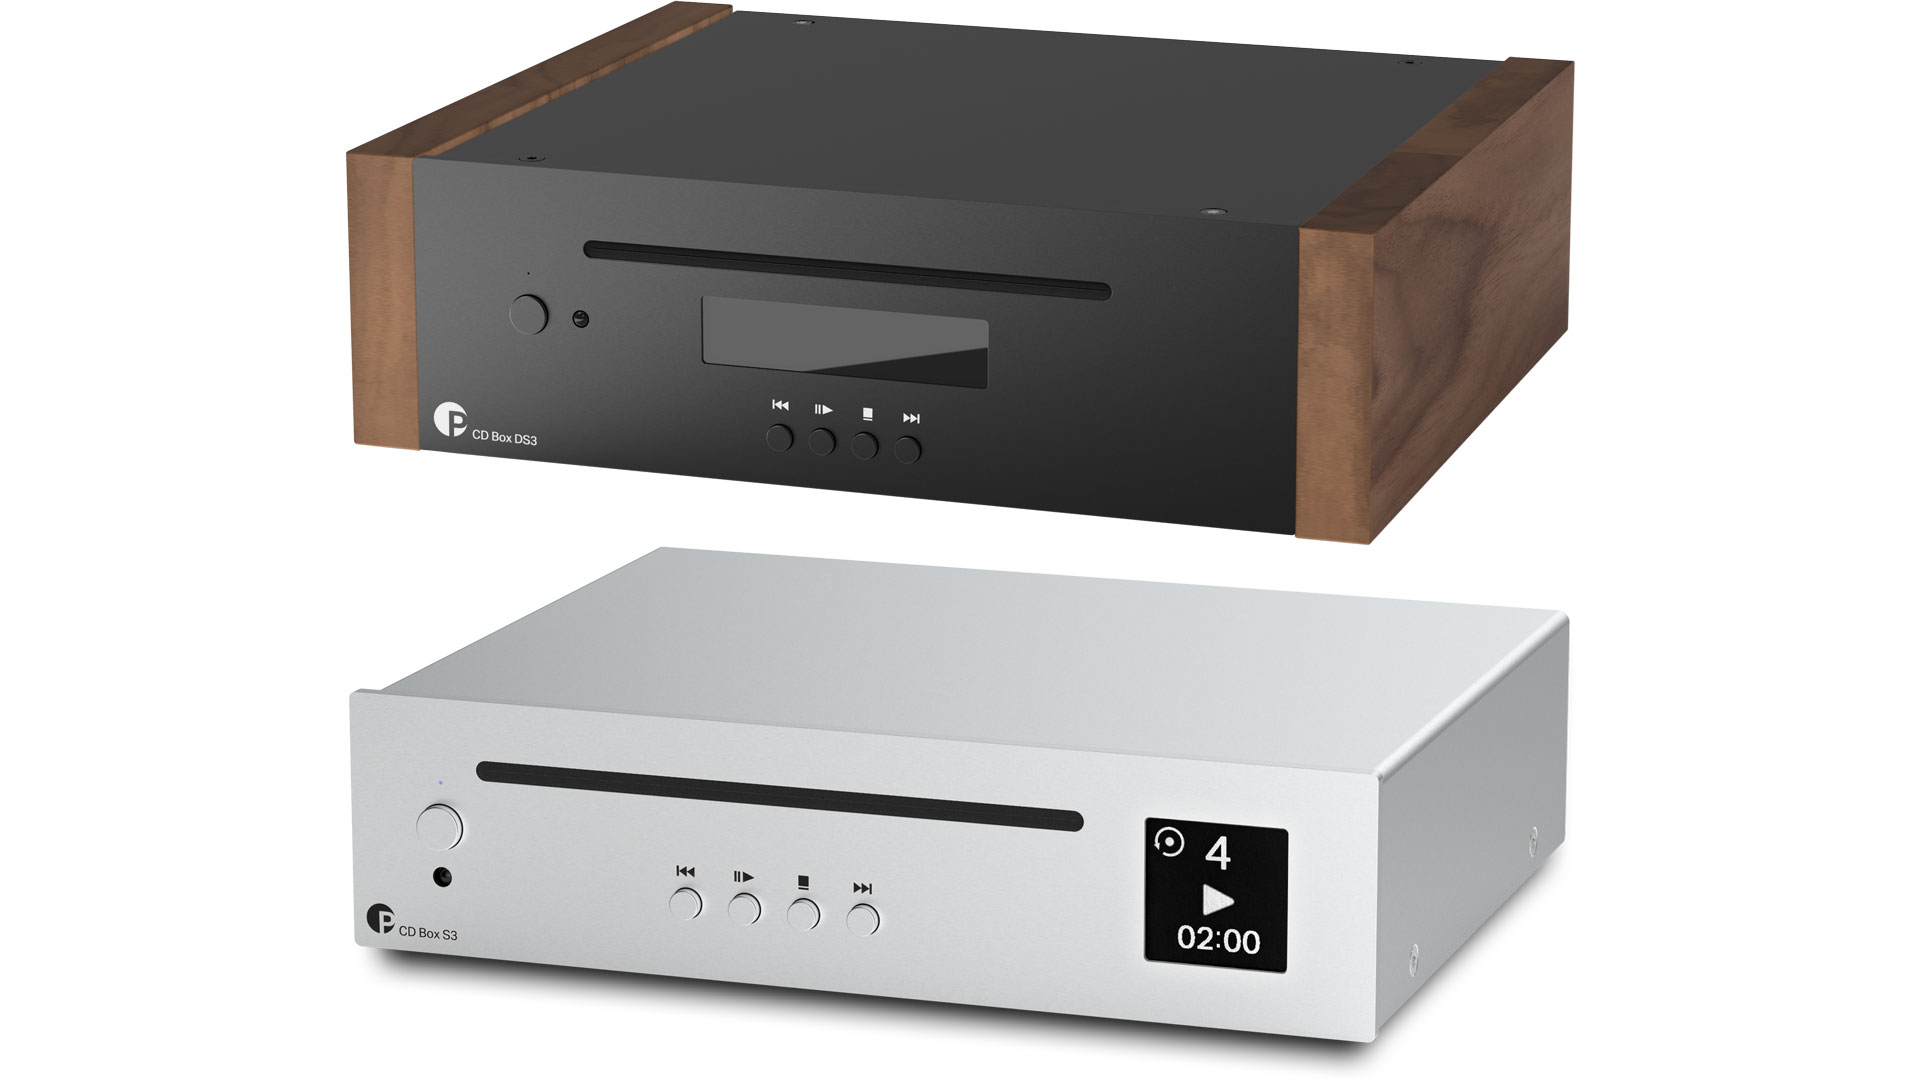 The new CD Box DS3 (upper) and CD Box S3 (lower) from Pro-Ject (Image Credit: Pro-Ject)